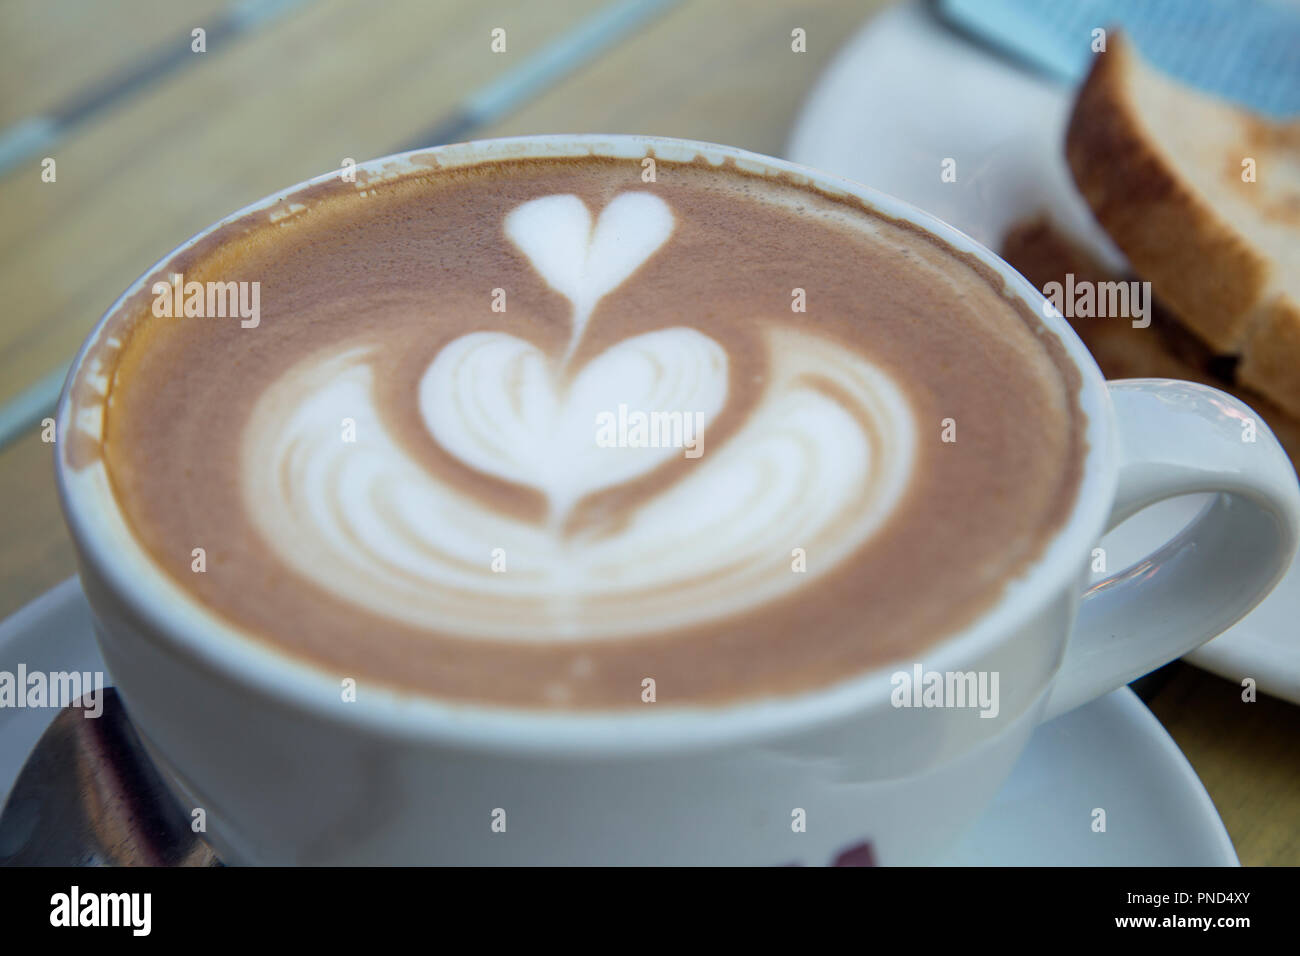 https://c8.alamy.com/comp/PND4XY/a-cup-of-coffee-with-decorative-heart-shaped-swirls-on-the-surface-PND4XY.jpg